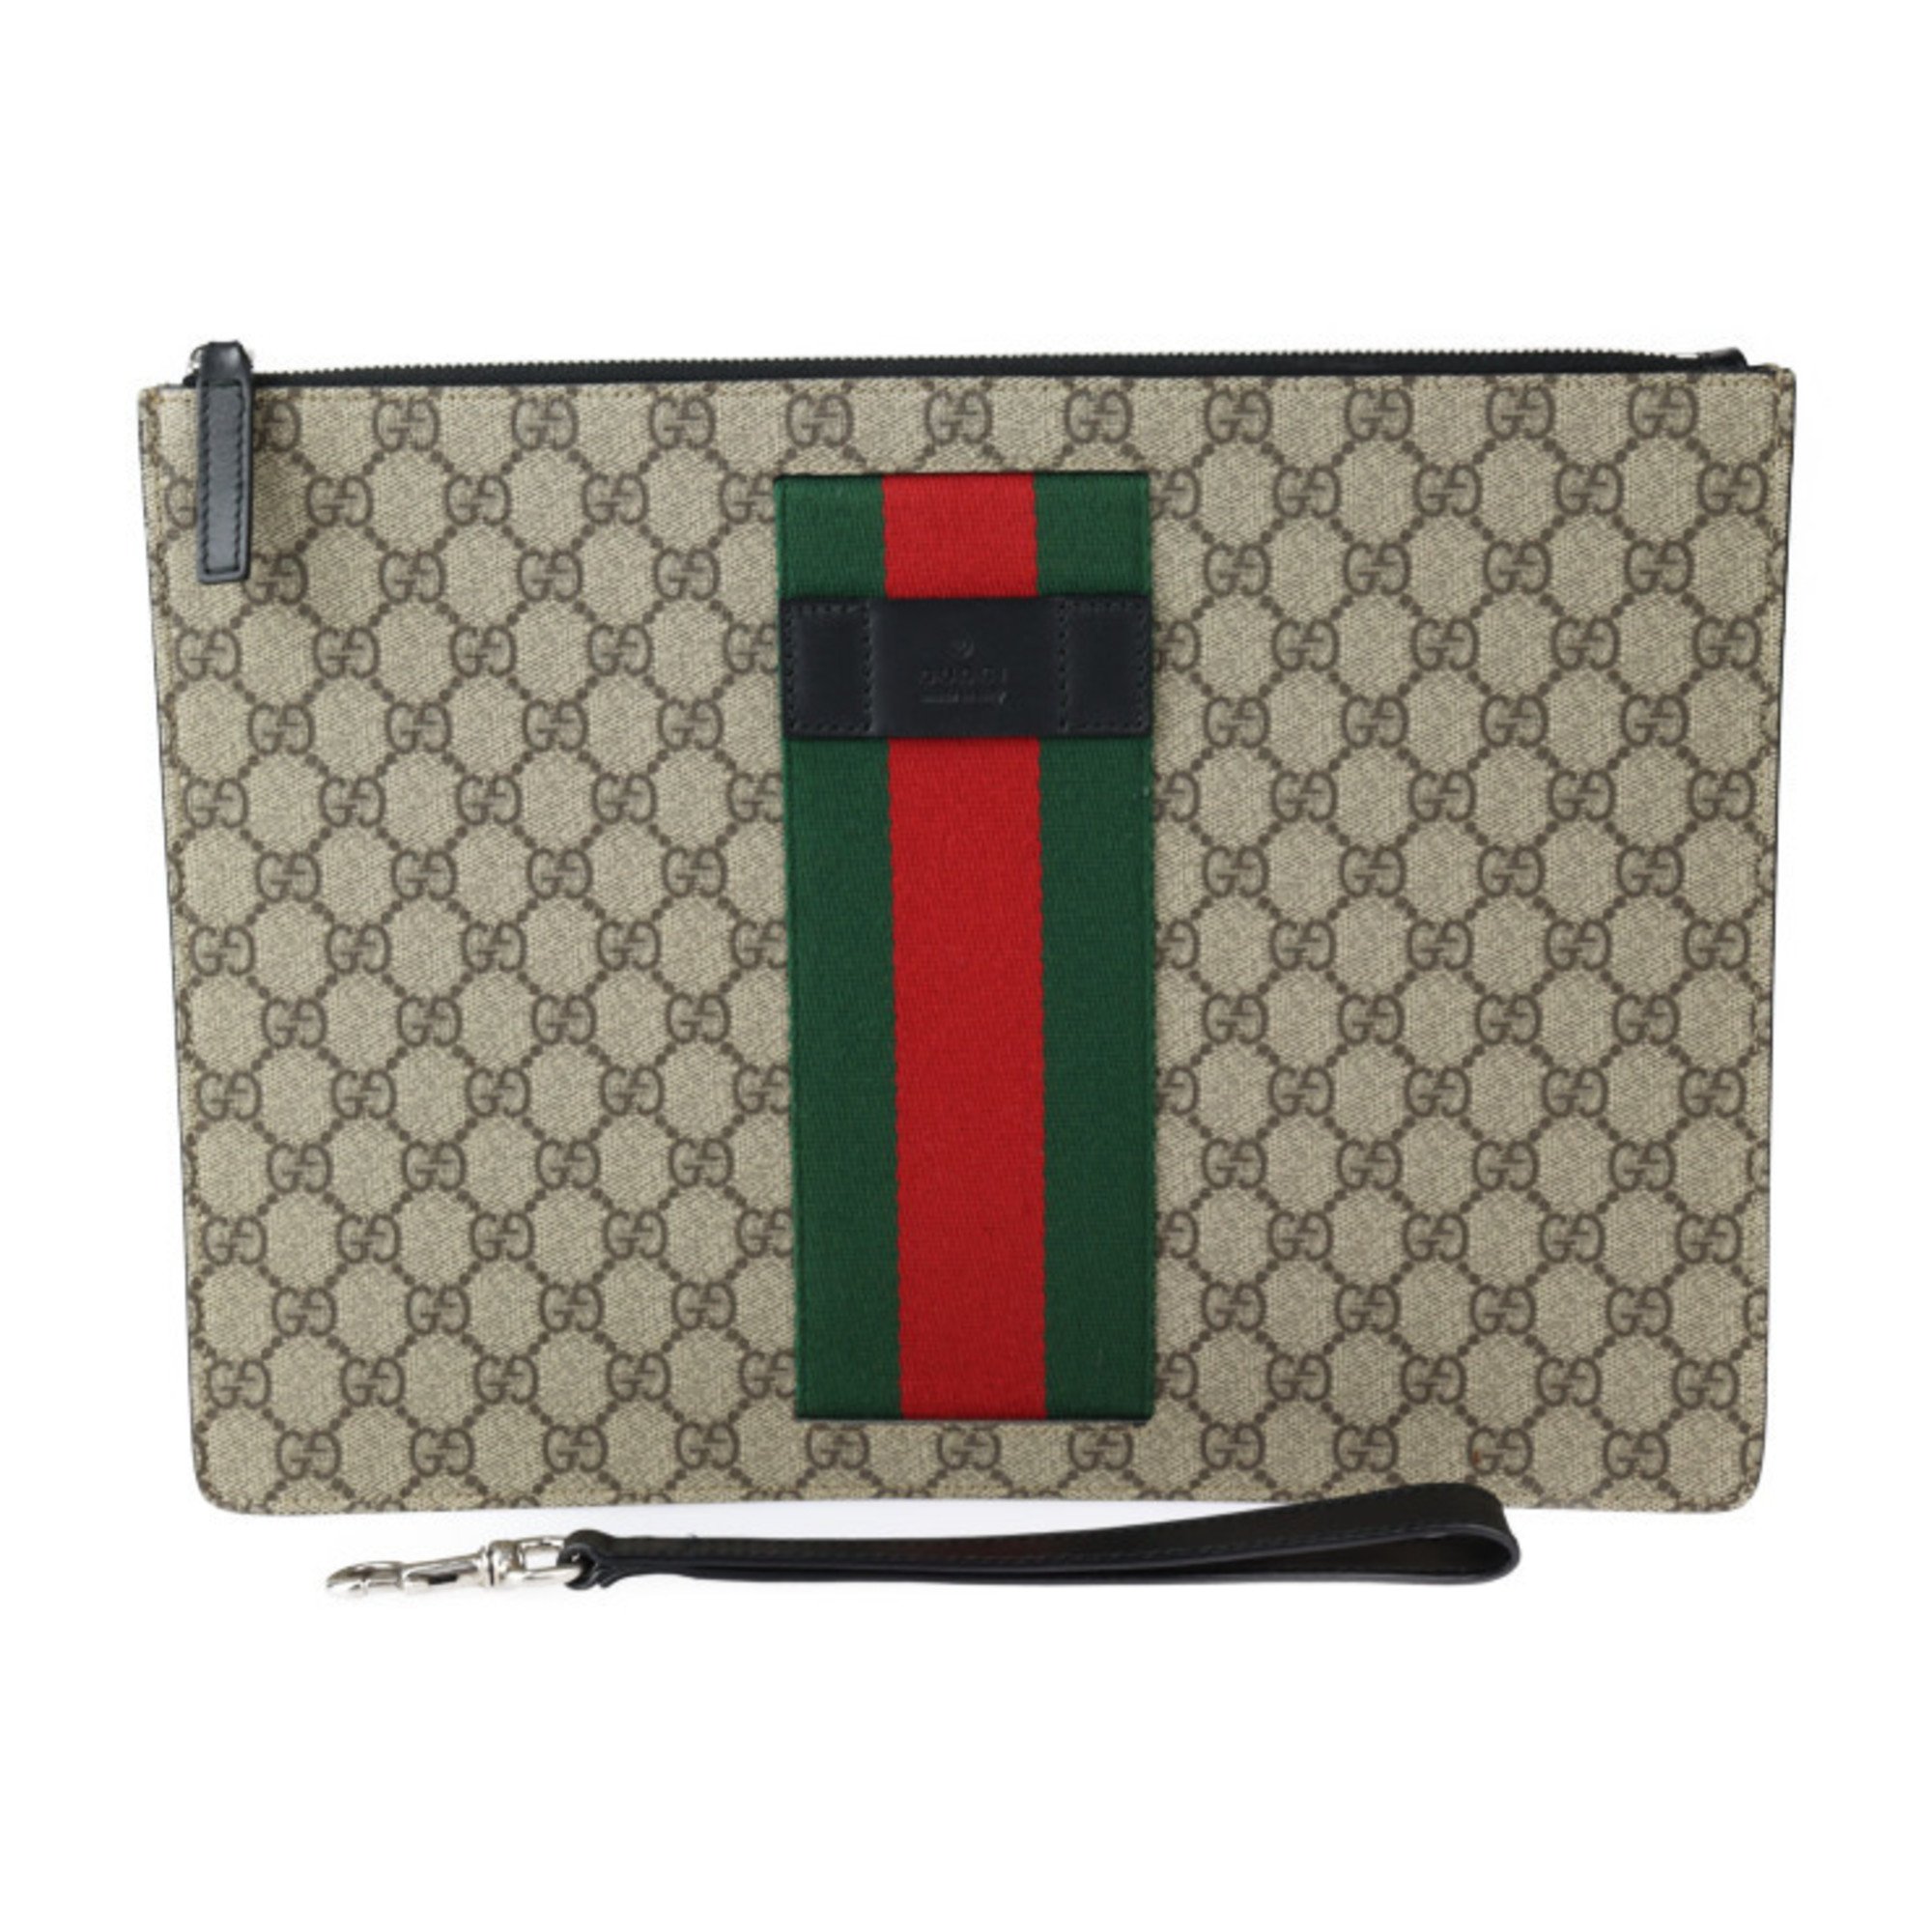 GUCCI Gucci Clutch Bag Sherry Line Second 433665 GG Supreme Canvas Leather Beige Green Red Wristlet Pouch